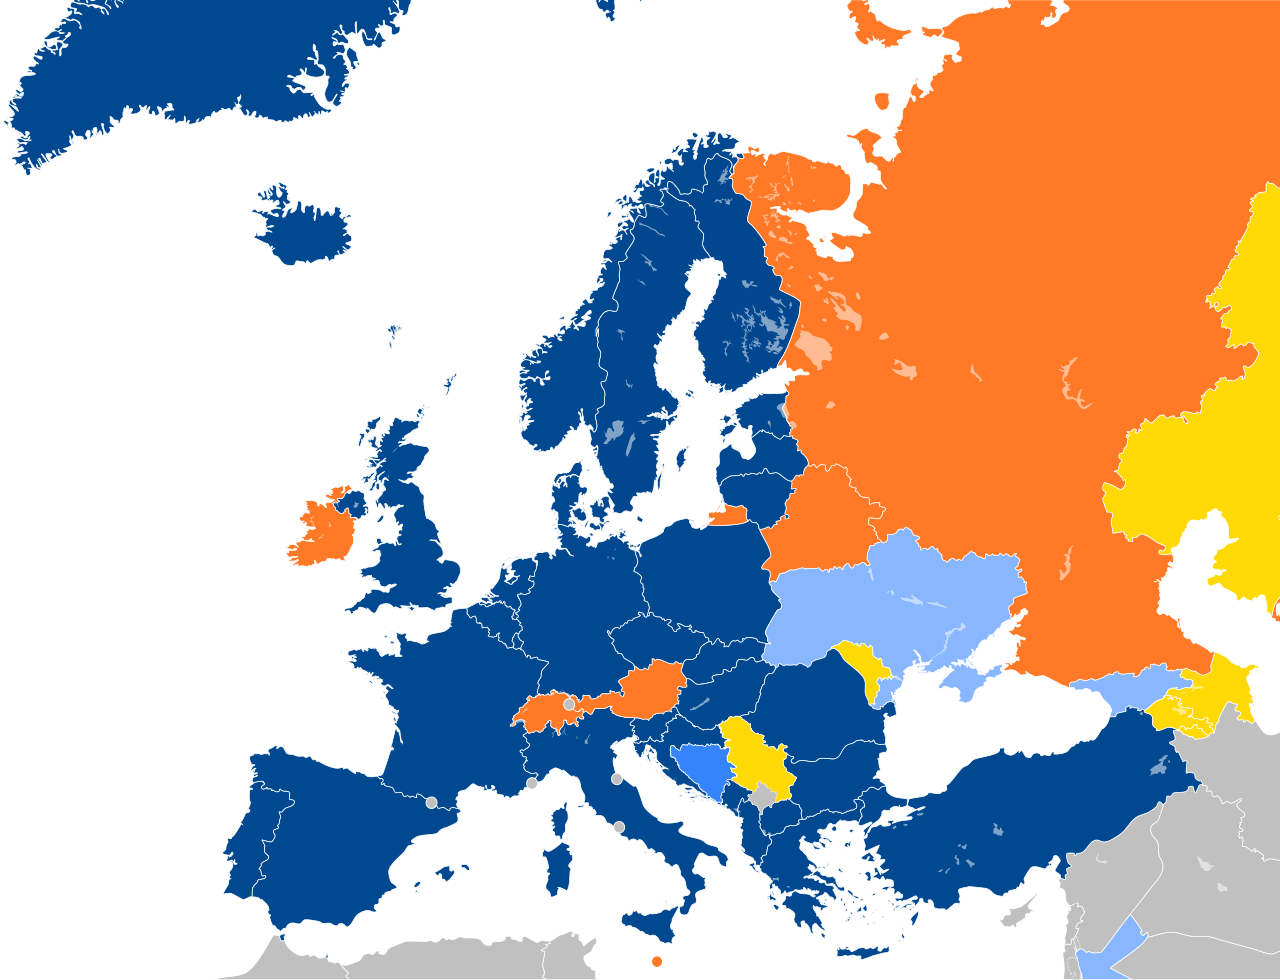 Map of NATO affiliations in Europe